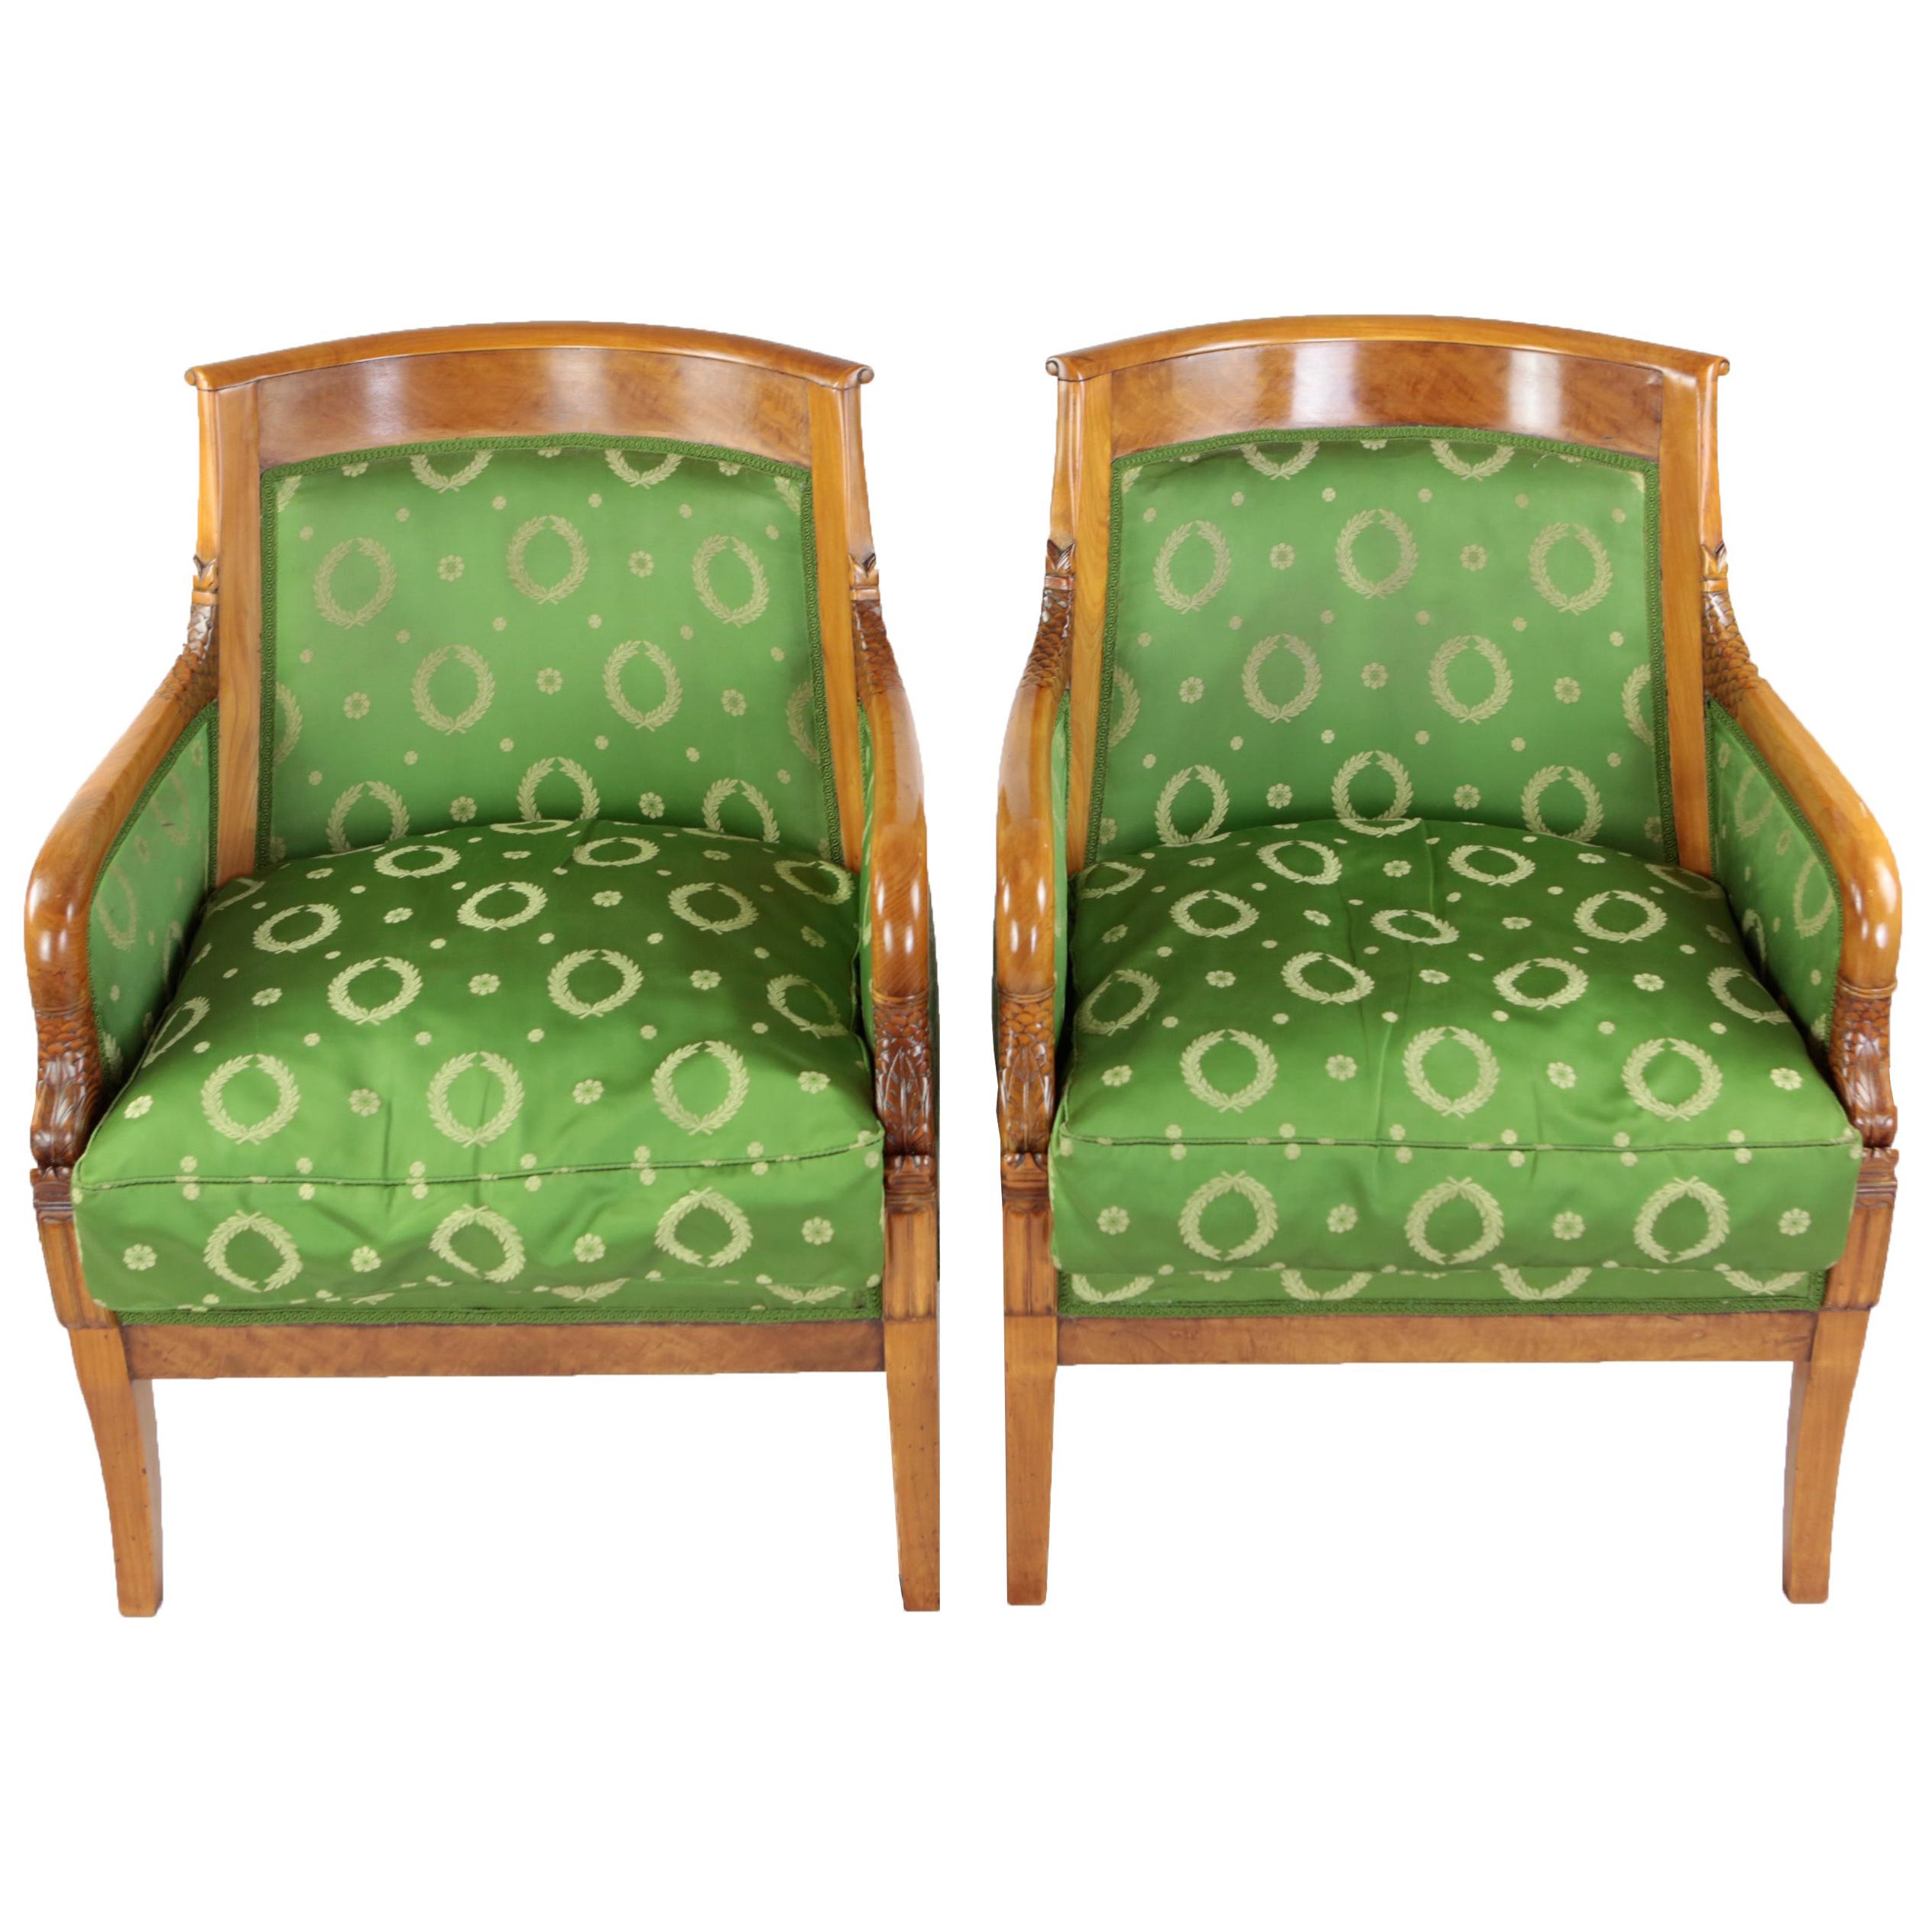 Late 19th Century Pair of Armchairs, Empire Style, France, Cherry and Maplewood For Sale